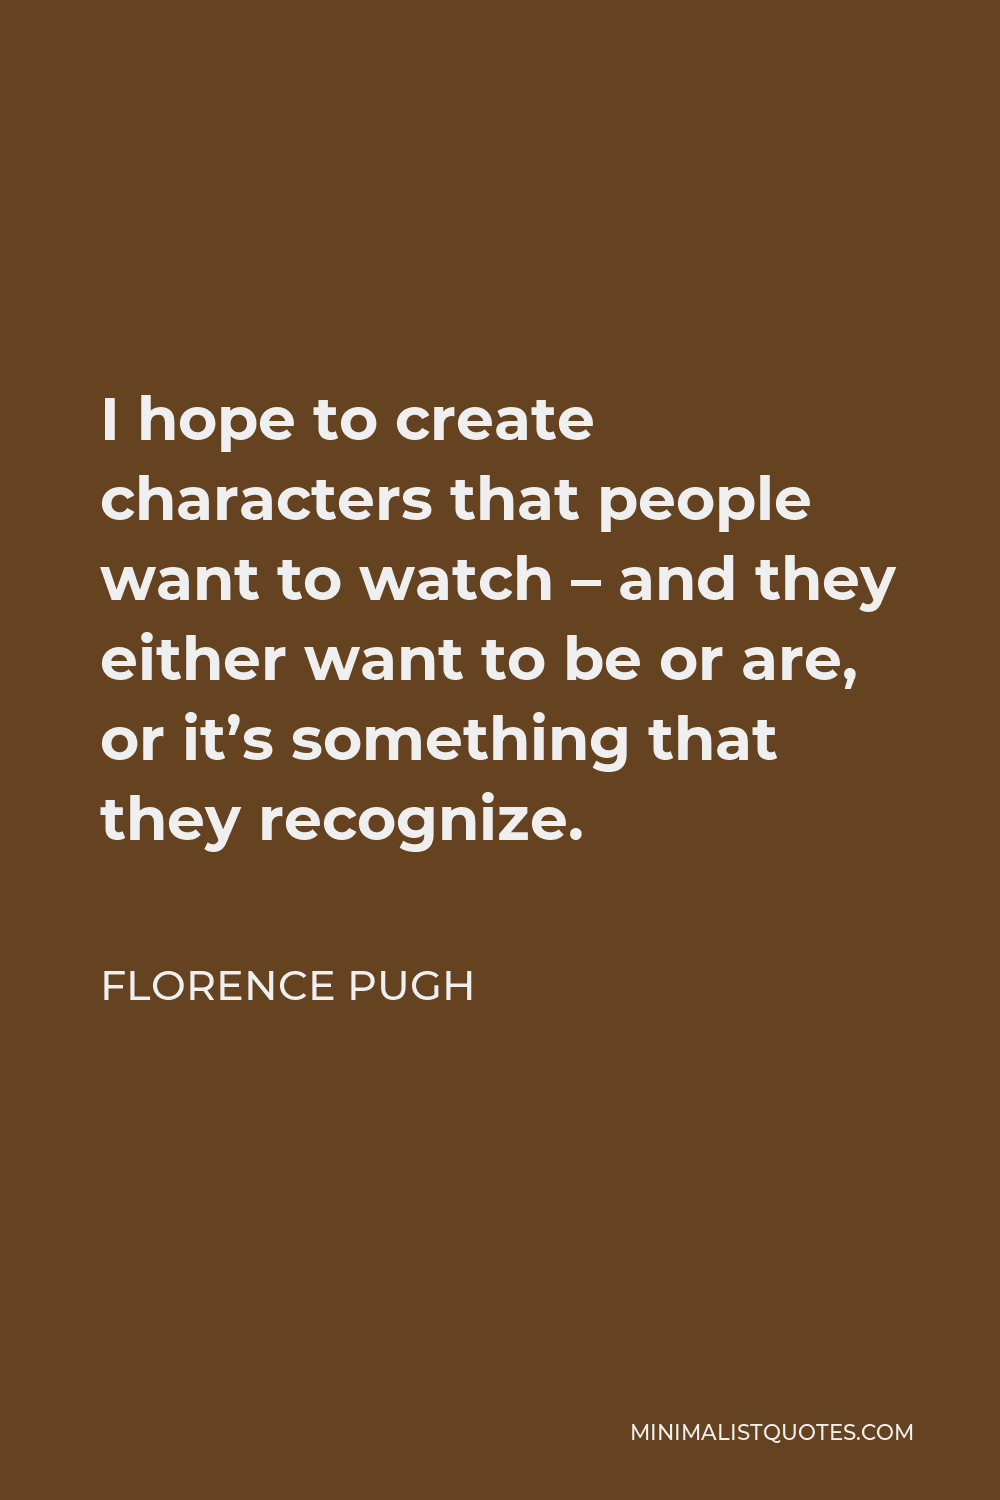 Florence Pugh Quote - I hope to create characters that people want to watch – and they either want to be or are, or it’s something that they recognize.